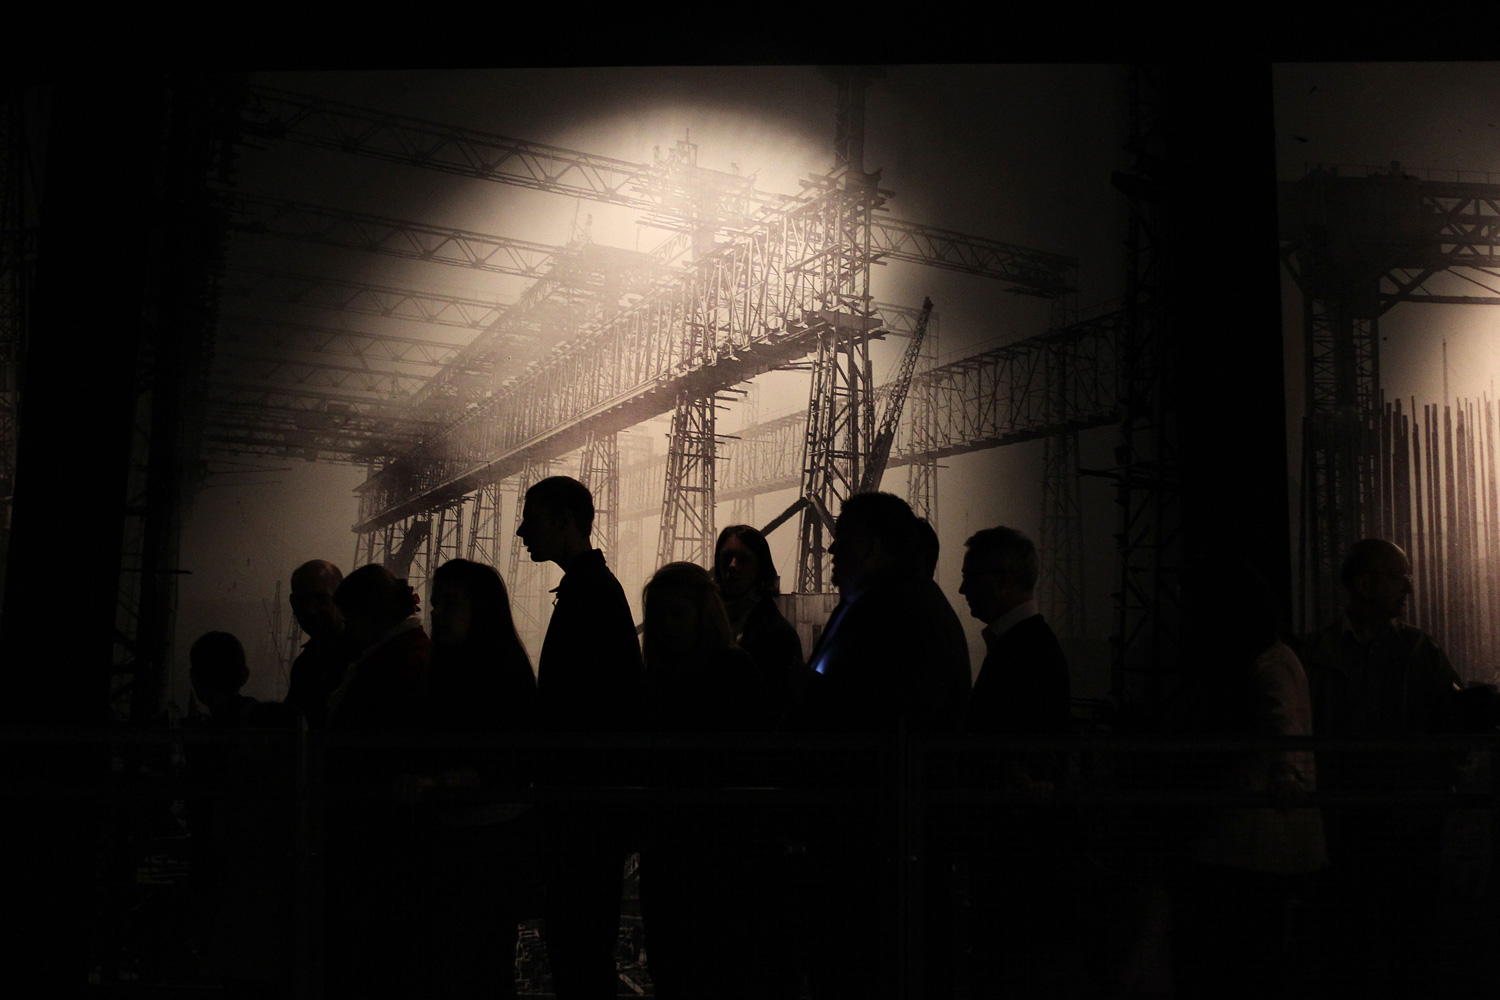 March 31, 2012. People queue inside the Titanic Belfast visitor center in Belfast.